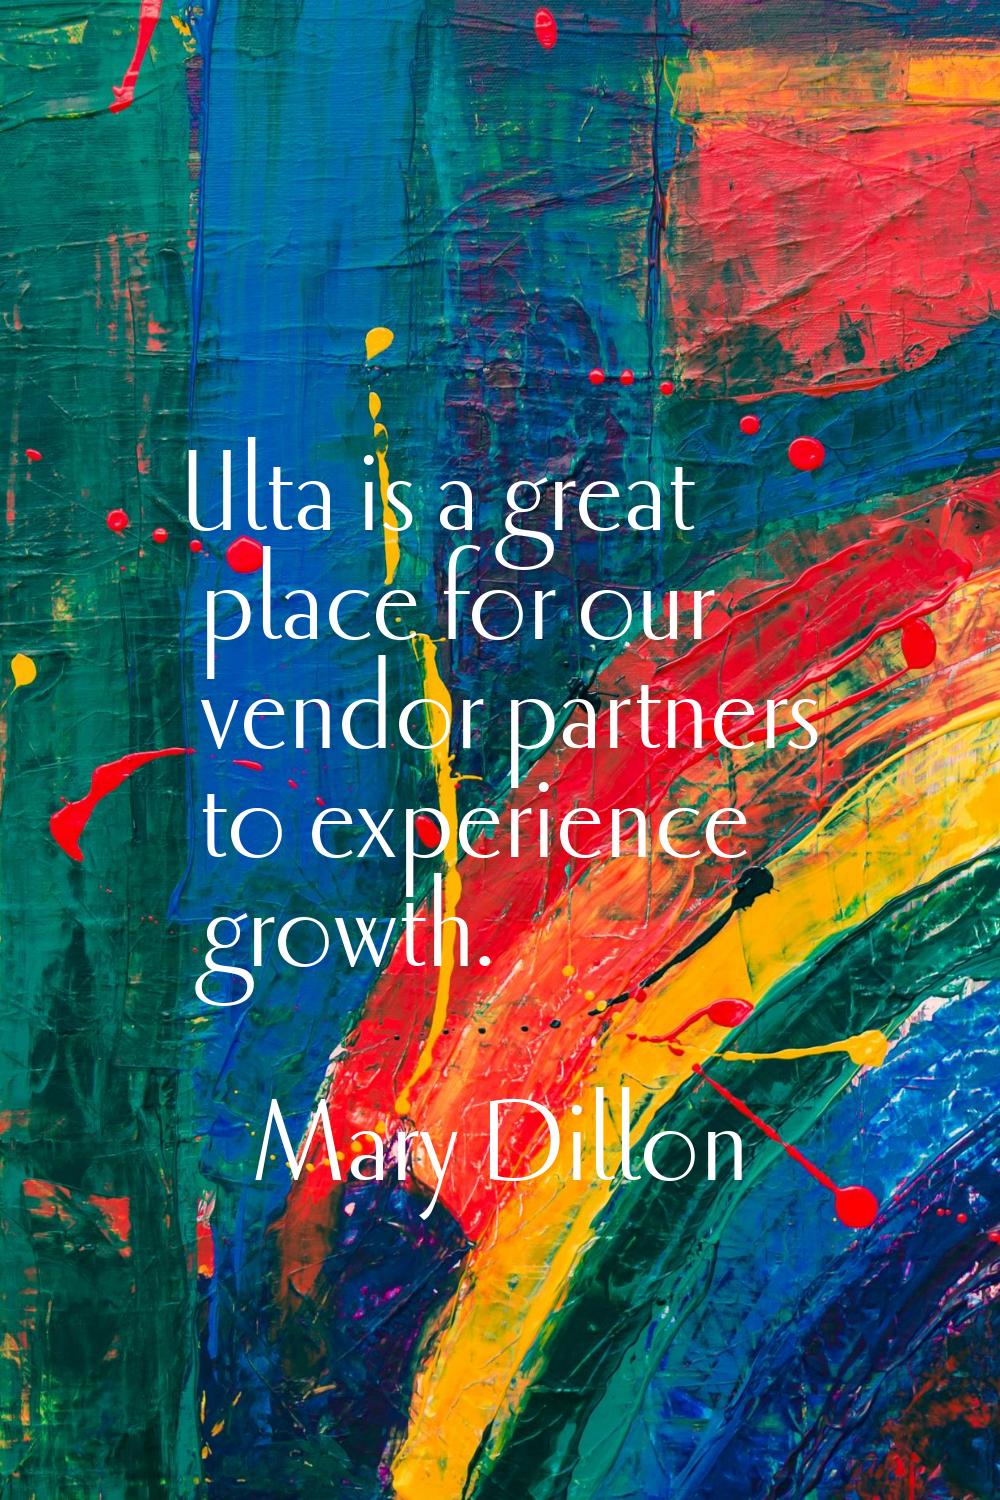 Ulta is a great place for our vendor partners to experience growth.